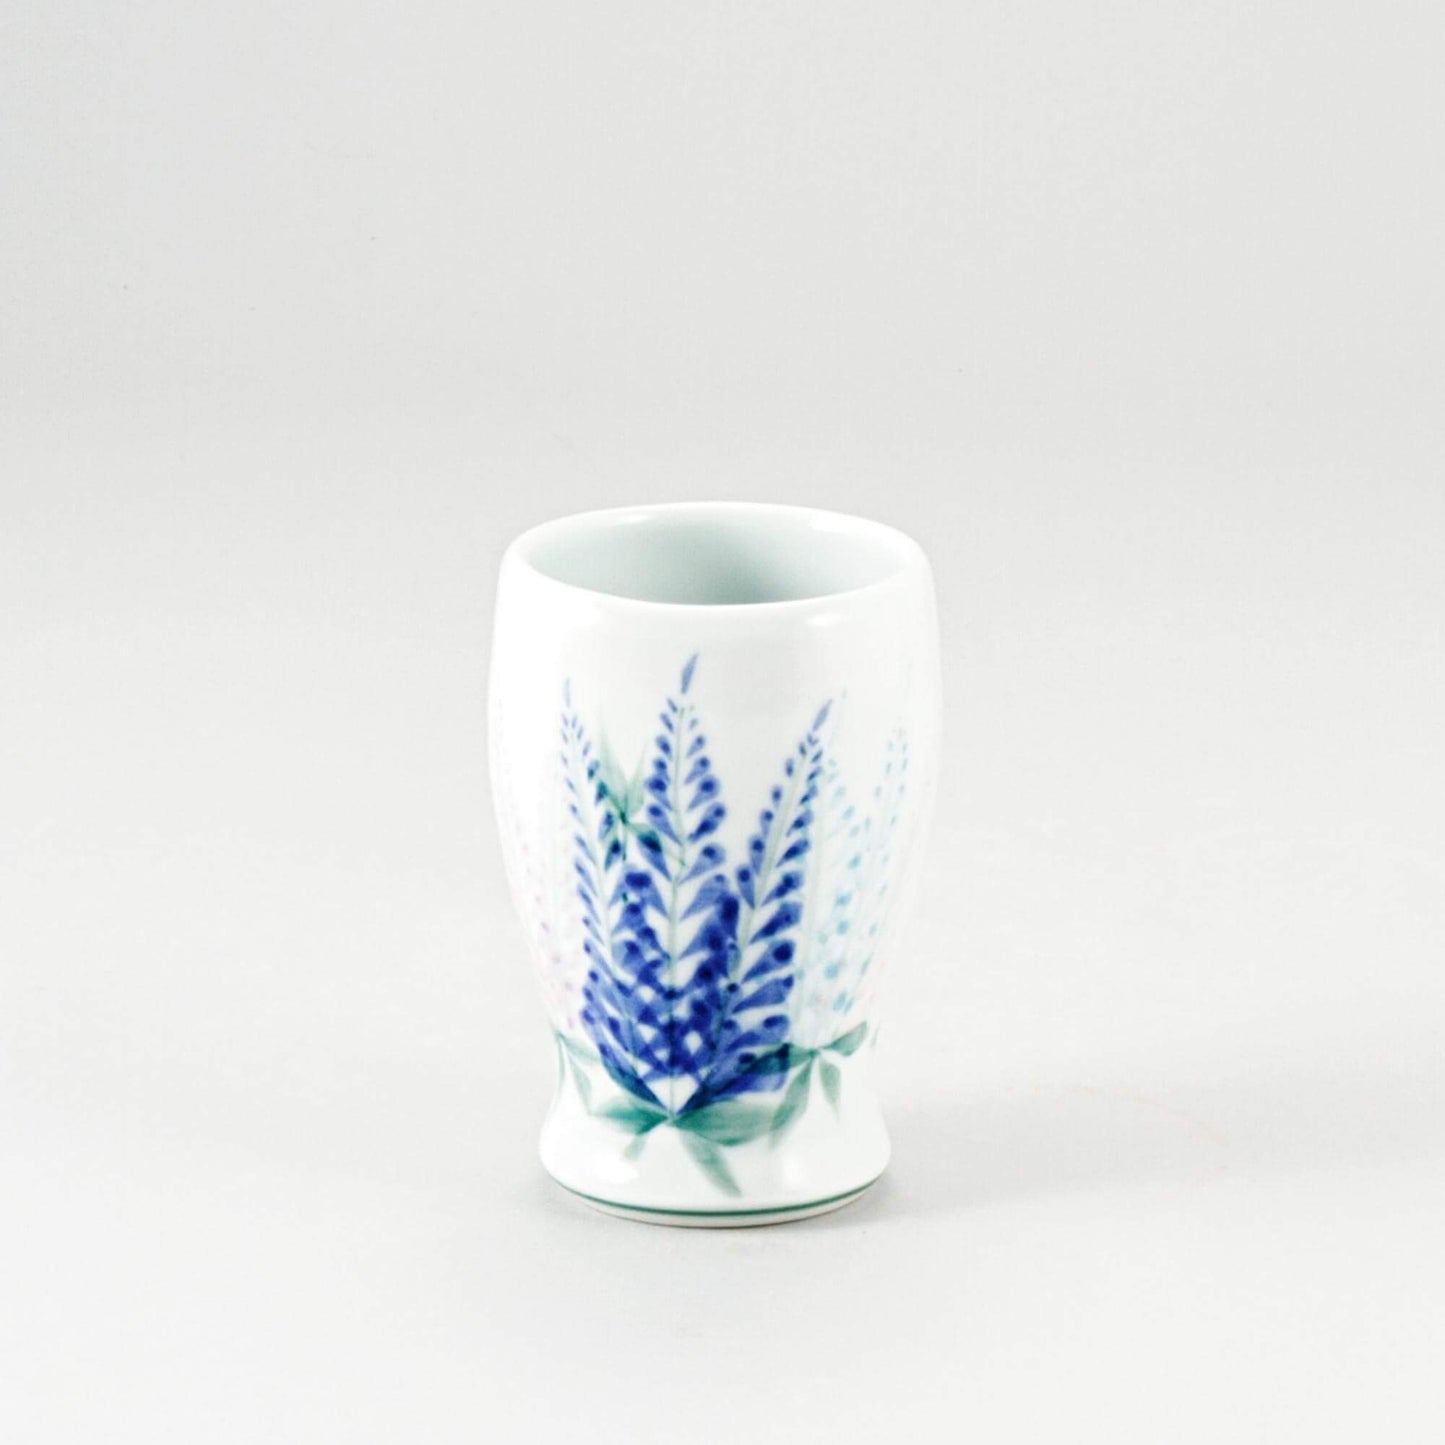 Handmade Pottery Curvy Tumbler in Lupine pattern made by Georgetown Pottery in Maine